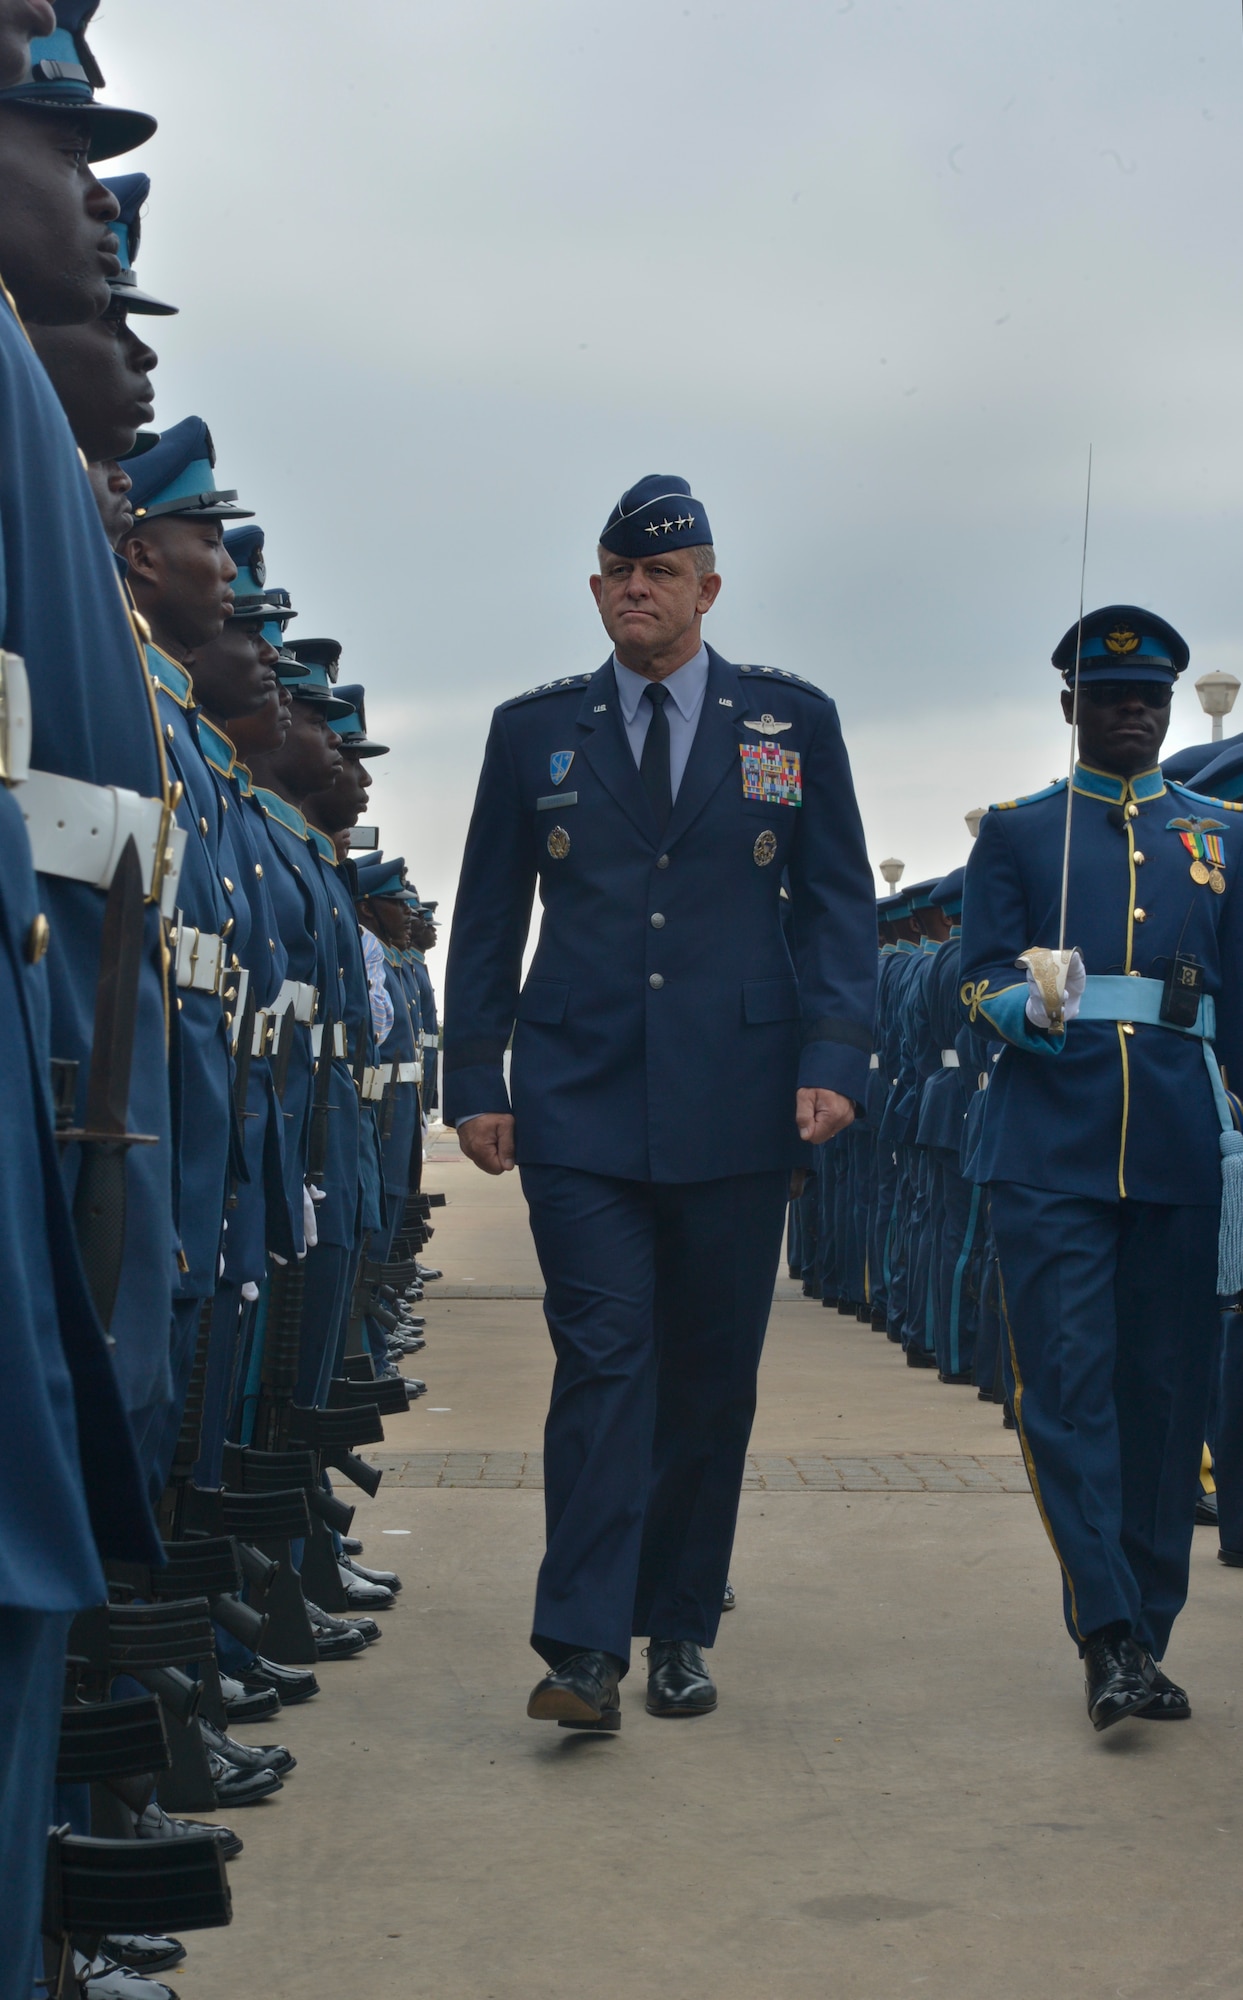 Gen. Frank Gorenc, U.S. Air Forces in Europe and Air Forces Africa commander, 
reviews the Ghanaian air force guard of honor, Aug. 20, 2013, Accra, Ghana. 
The Ghanaian air force opened the 2013 Regional Air Chiefs Symposium with a 
traditional troop guard ceremony to honor the senior ranking officer in 
attendance. (U.S. Air Force photo by Airman 1st Class Jordan 
Castelan/Released)